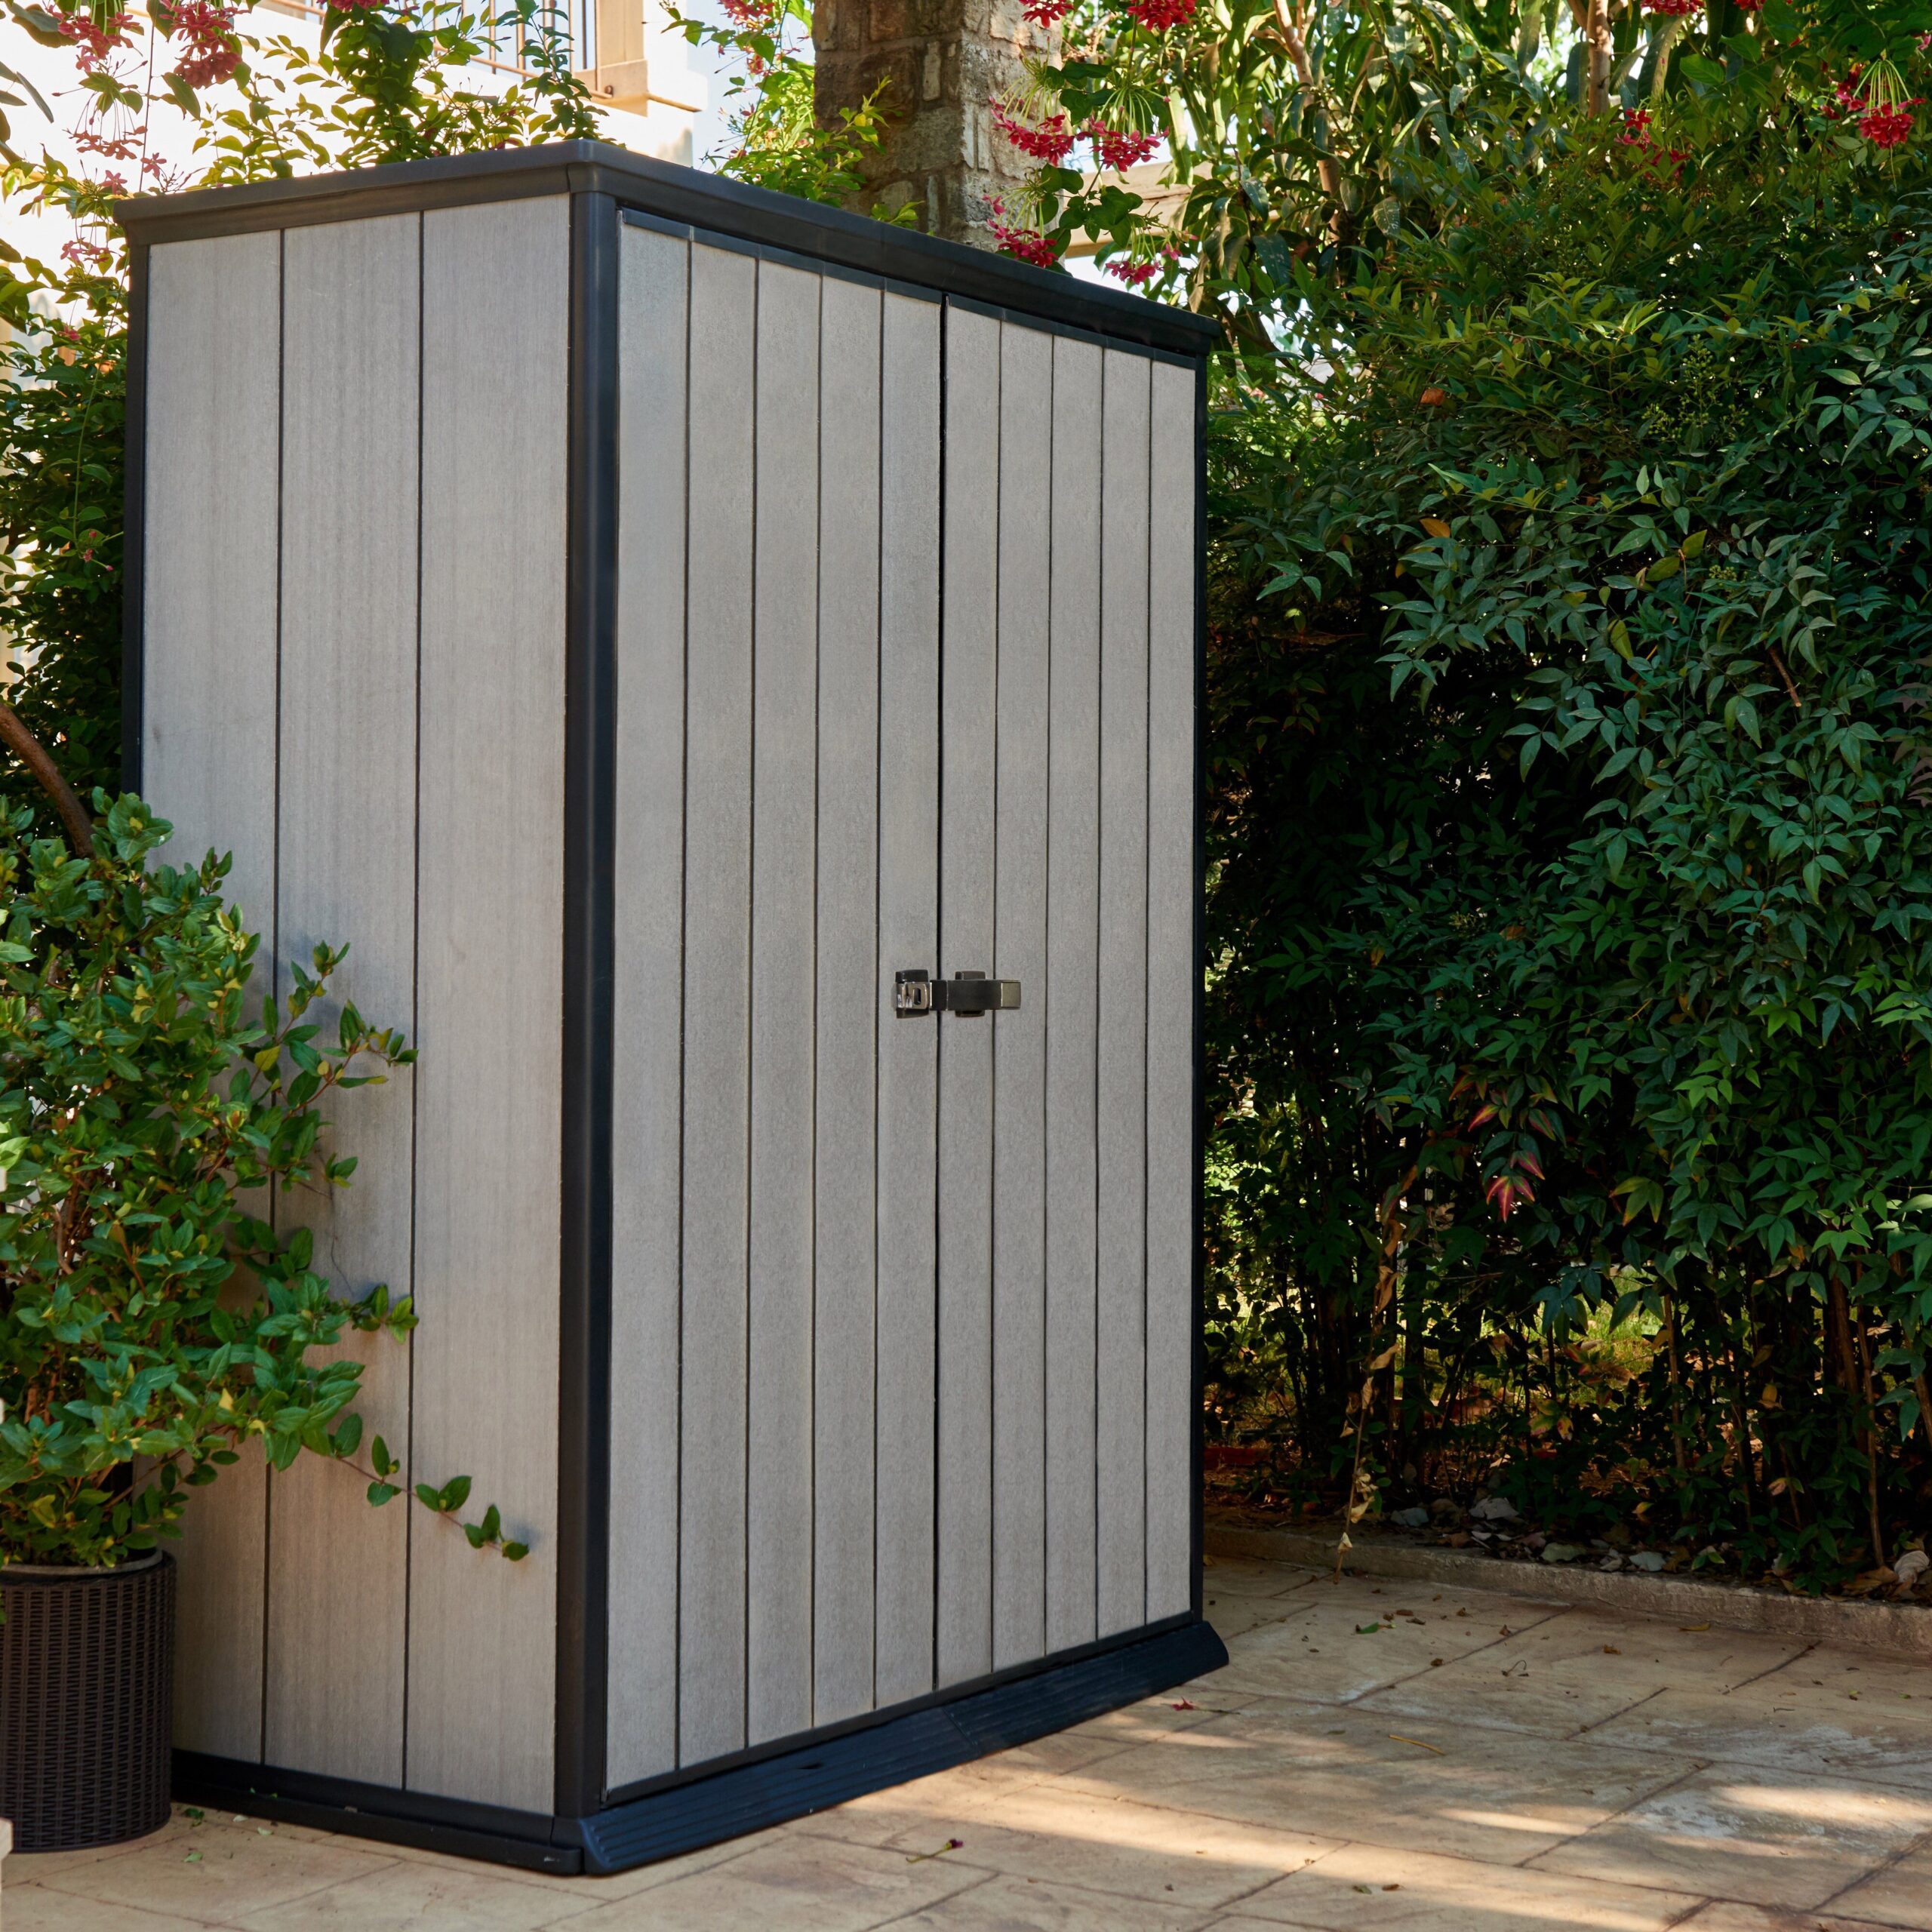 The Benefits of Resin Storage Sheds for Your Outdoor Storage Needs